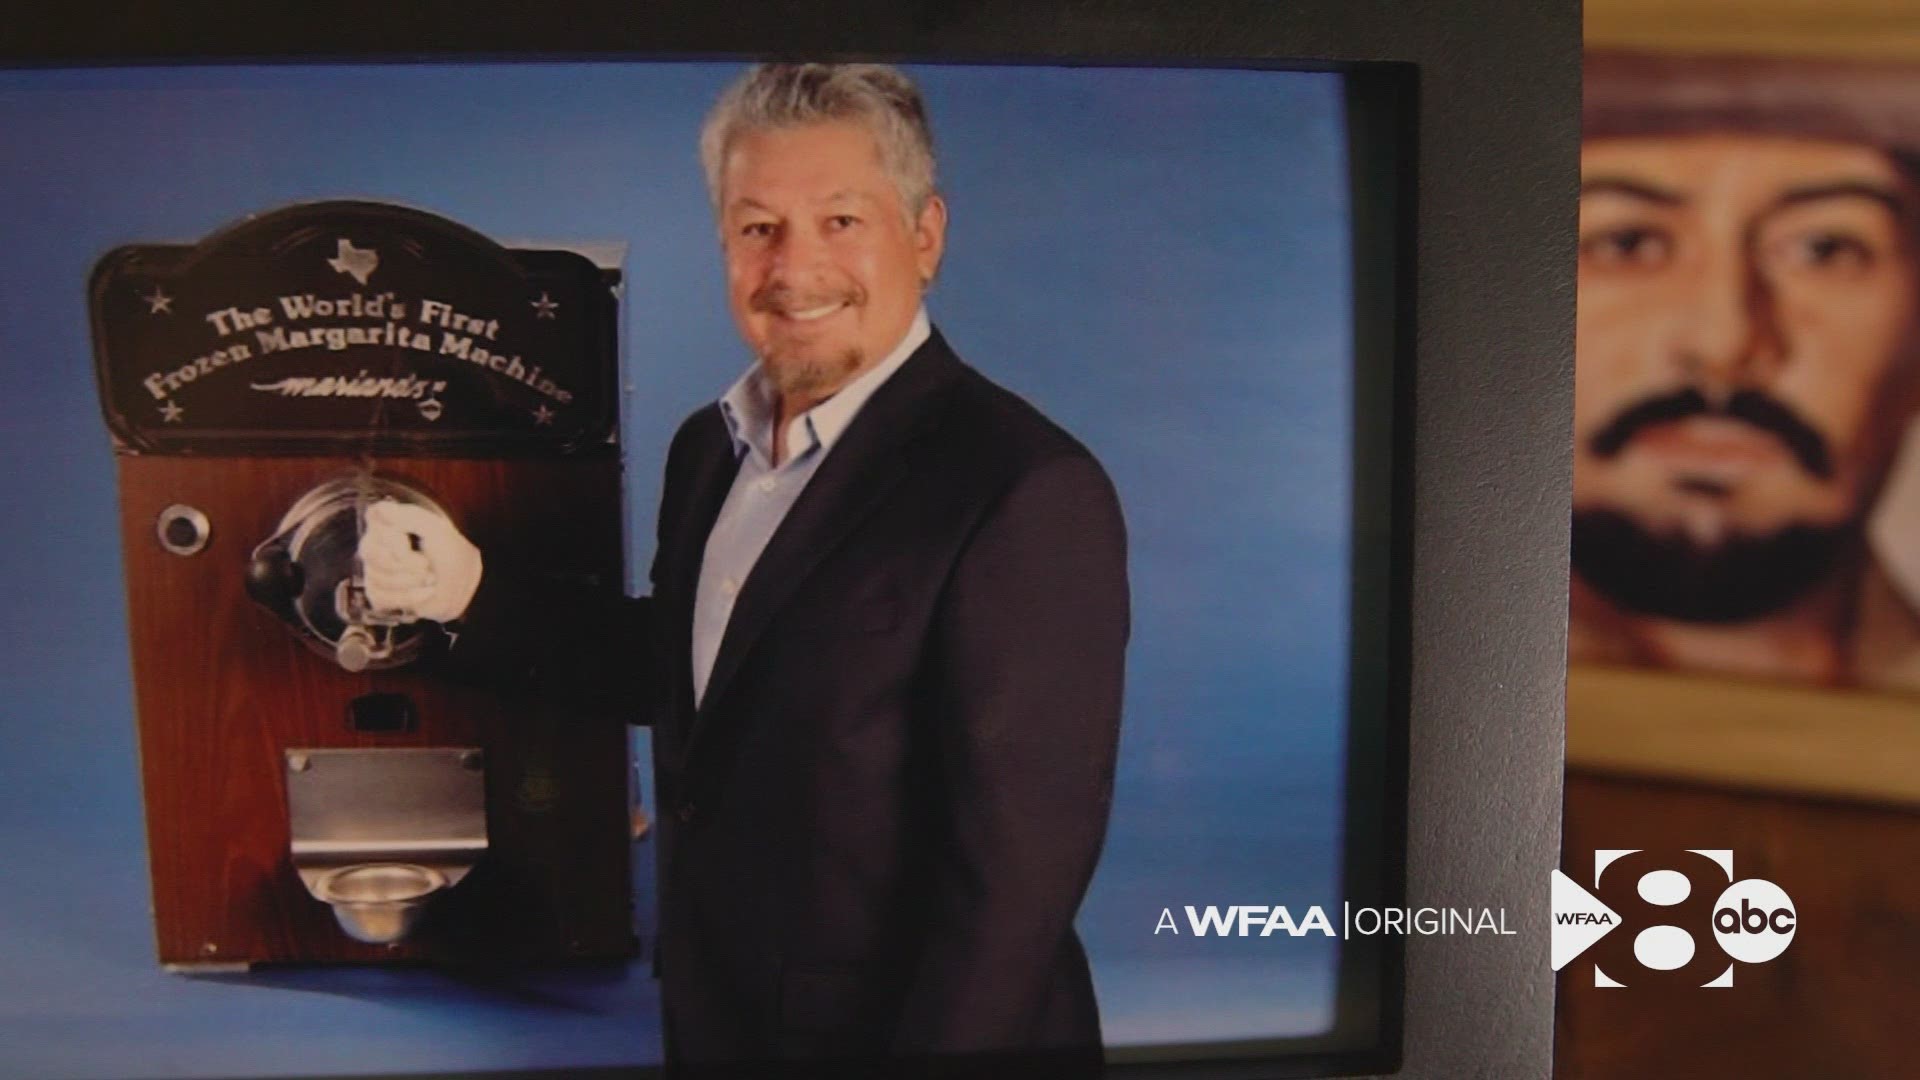 'I'm happy to be known for something,' said Mariano Martinez, as his gift to the world - the first frozen margarita machine - turns 50 years old this month.